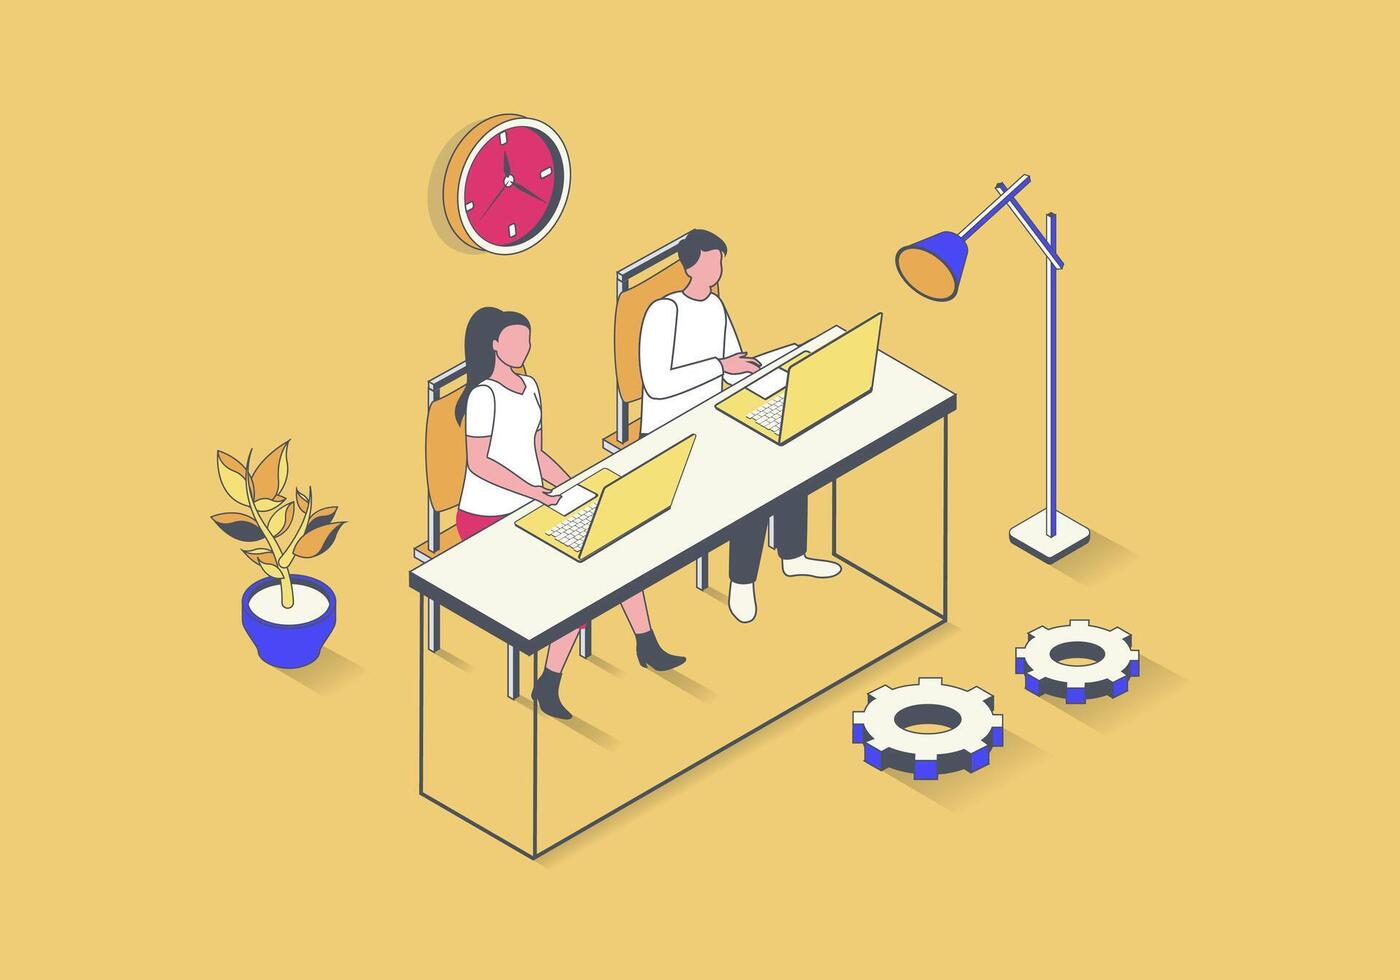 Coworking space concept in 3d isometric design. Colleagues work with laptops in open office together, collaborating in team at project. Vector illustration with isometry people scene for web graphic